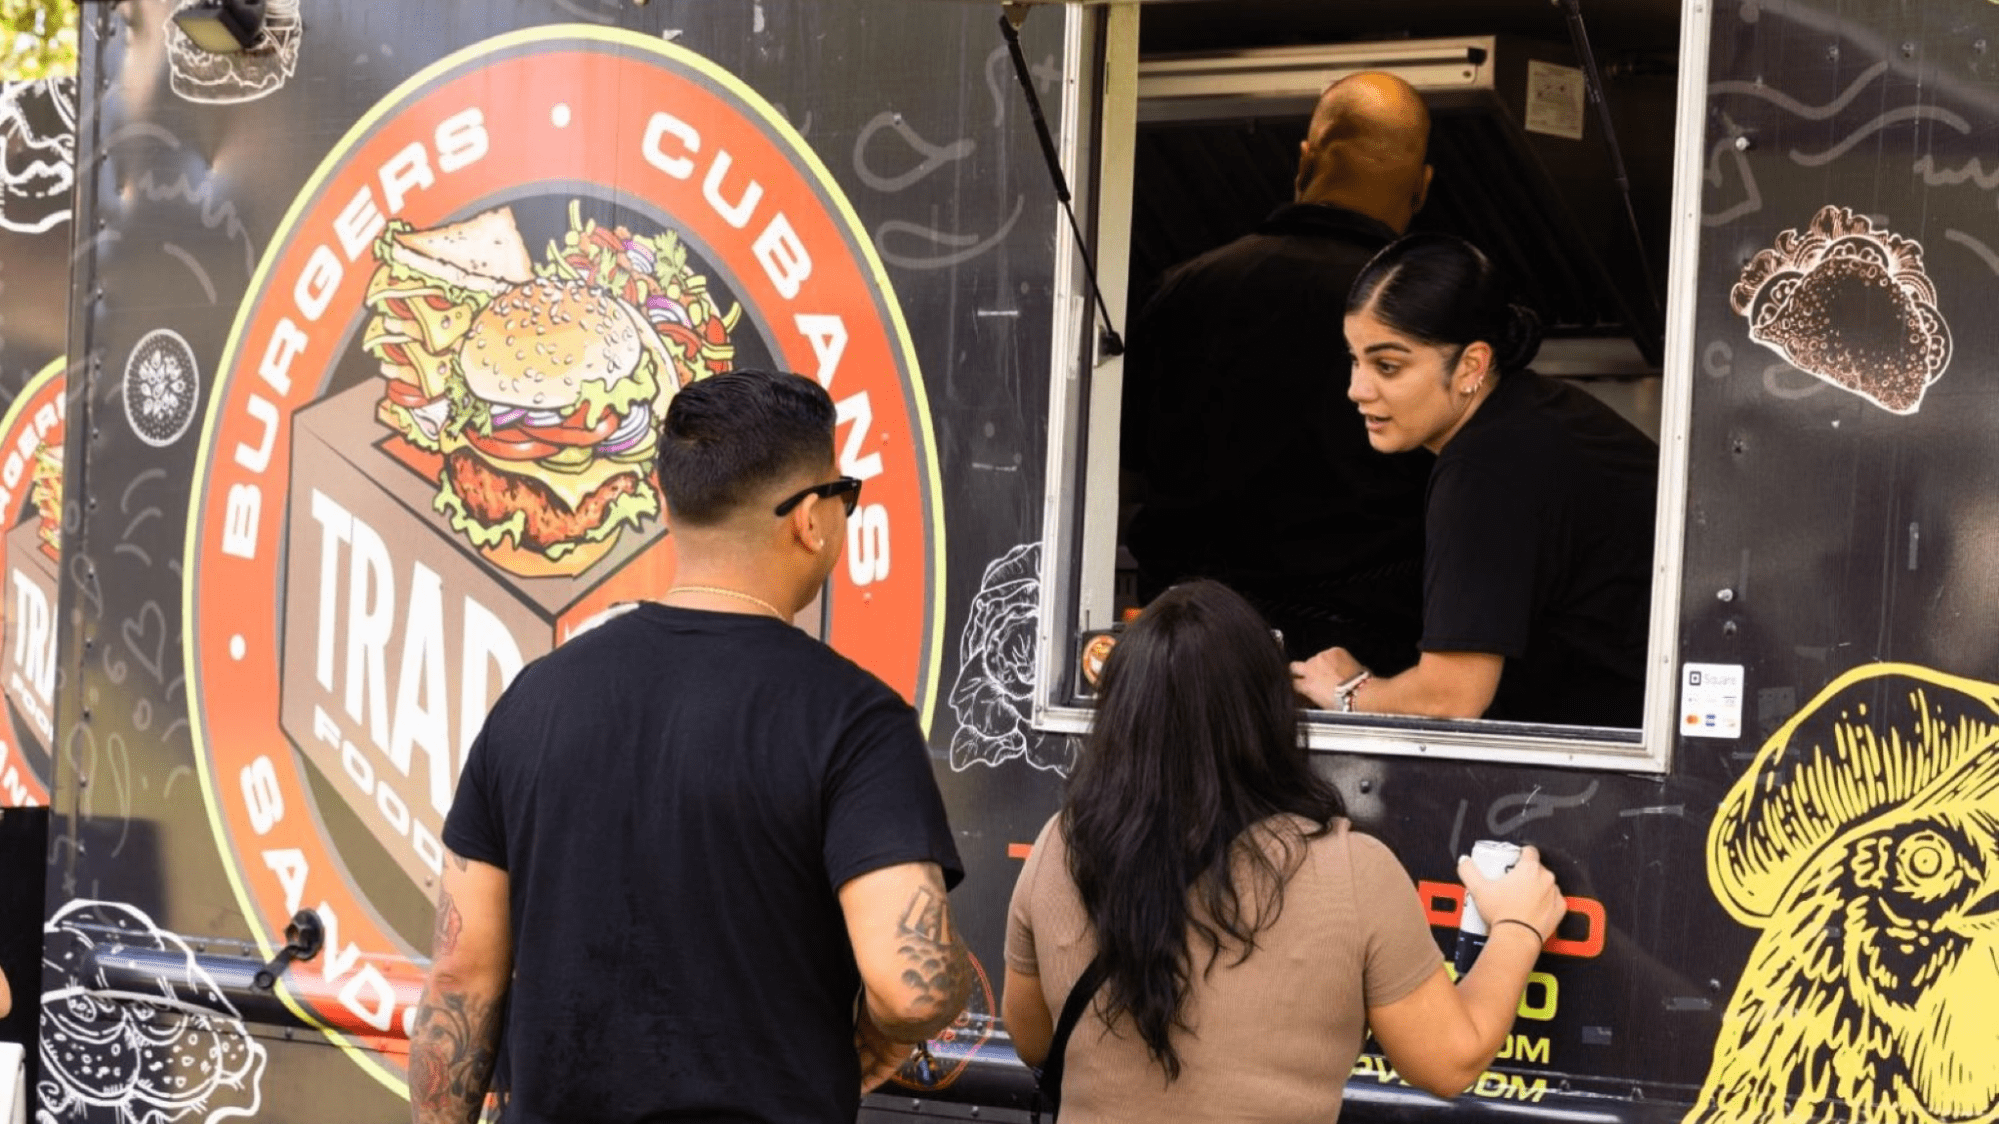 Food truck catering costs